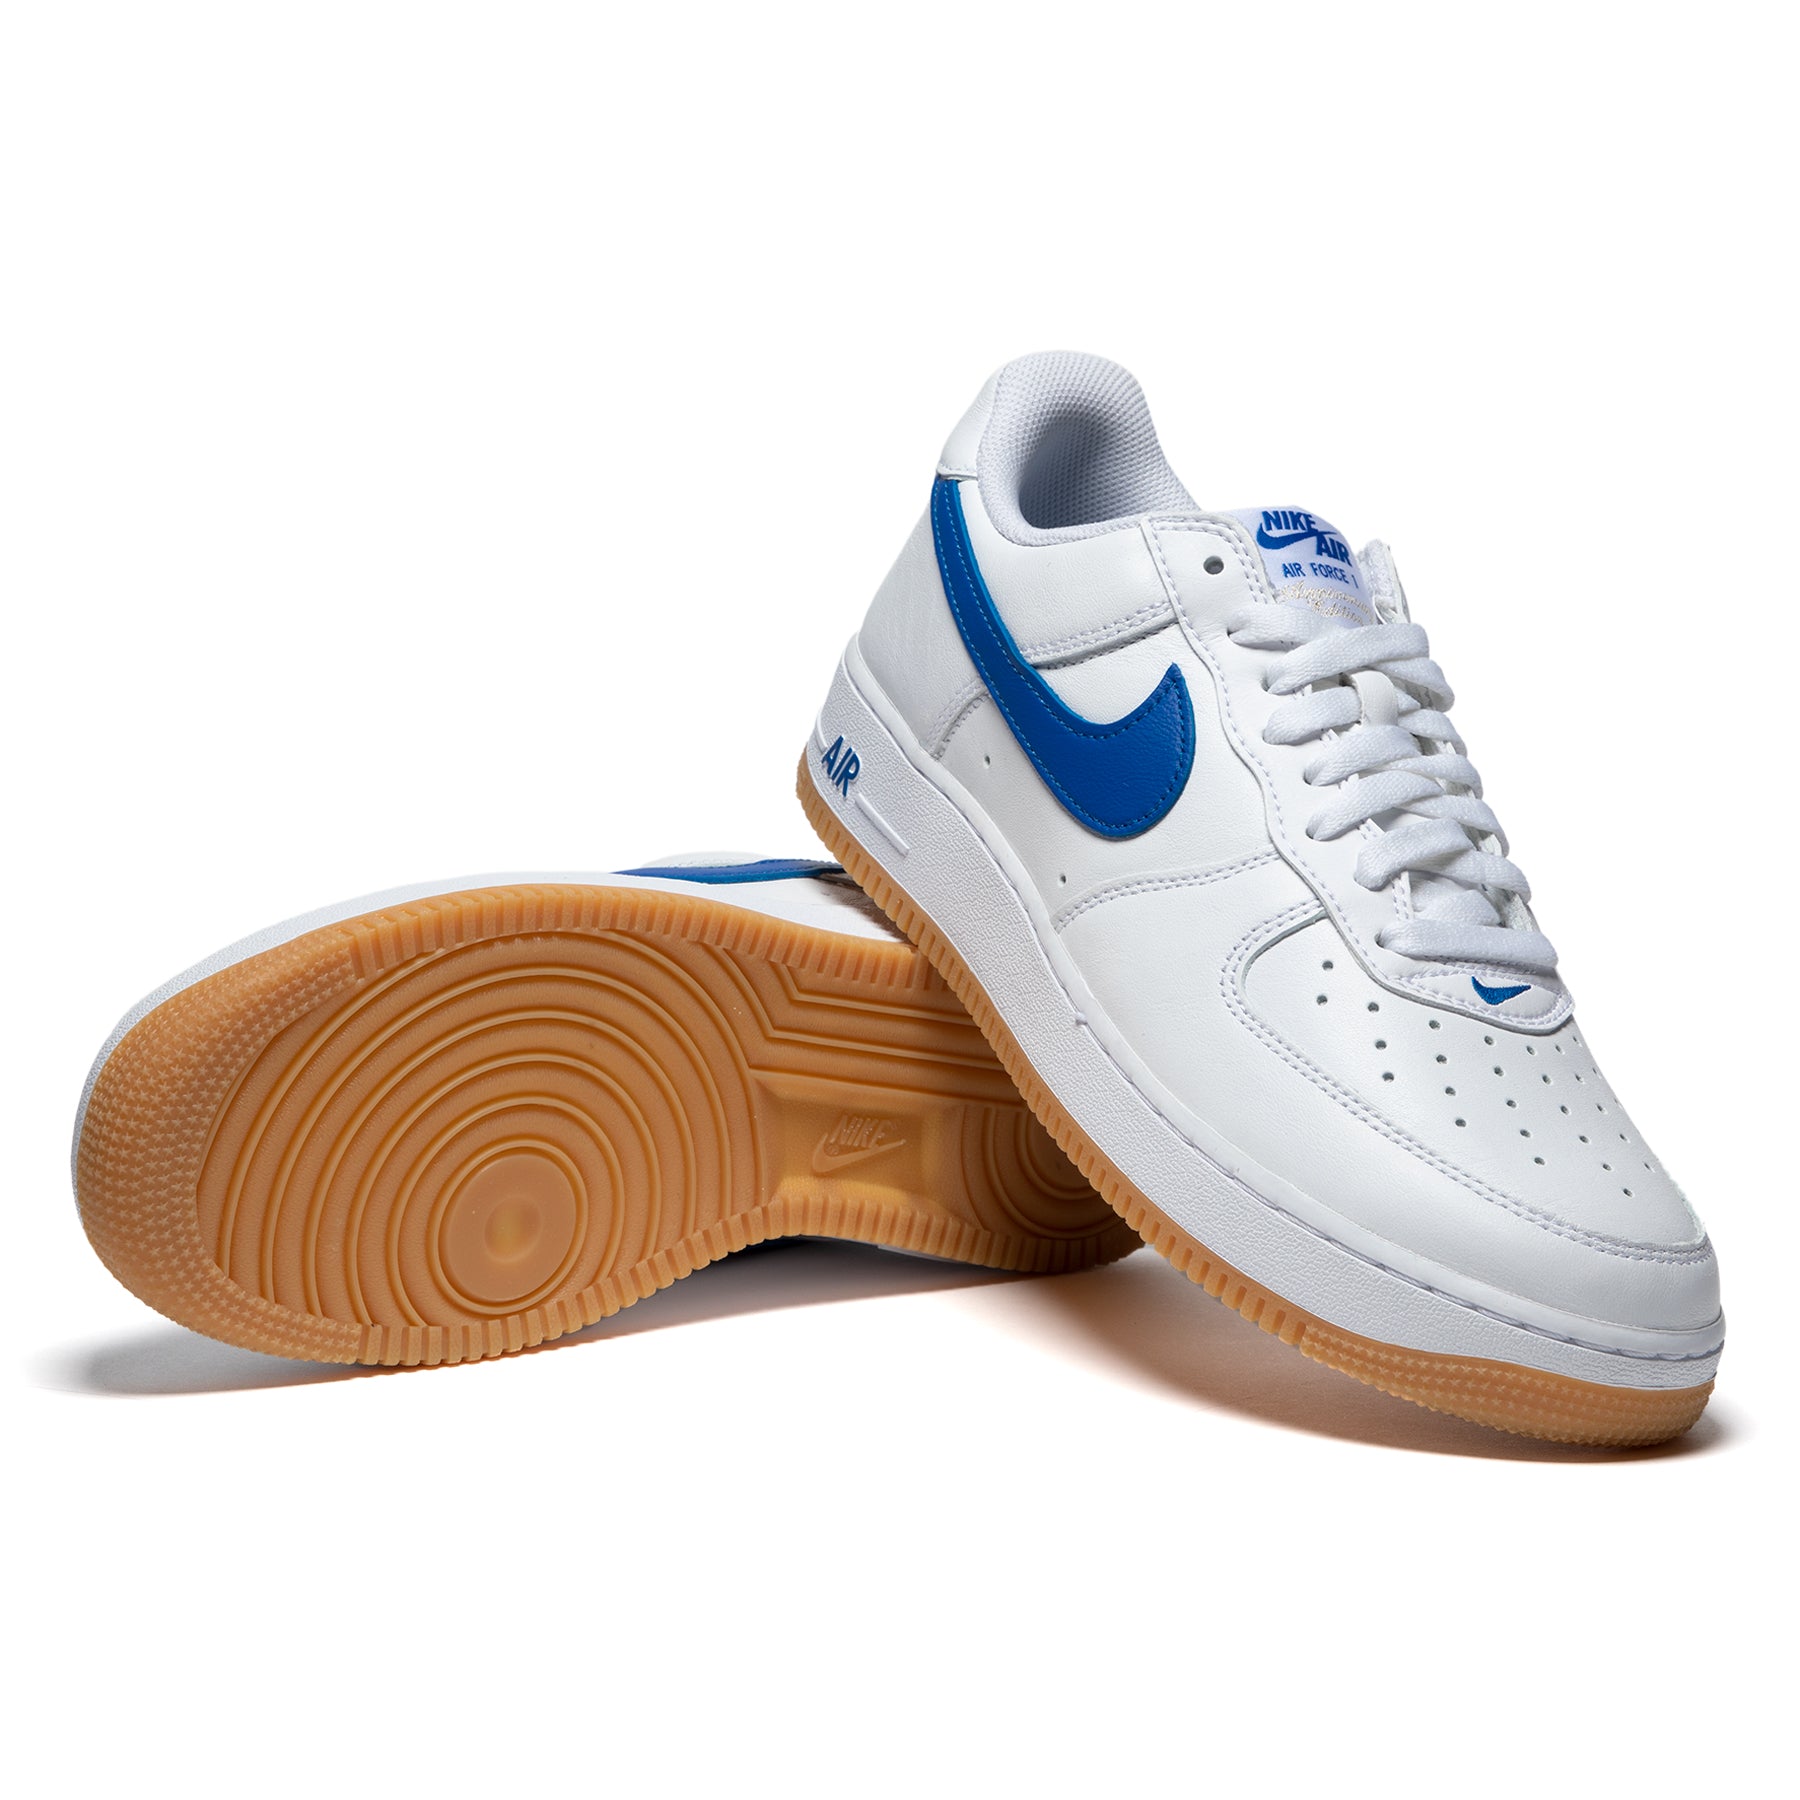 Air Force 1 Low Retro 'Color of the Month' - White/Royal Blue/Gum Yellow